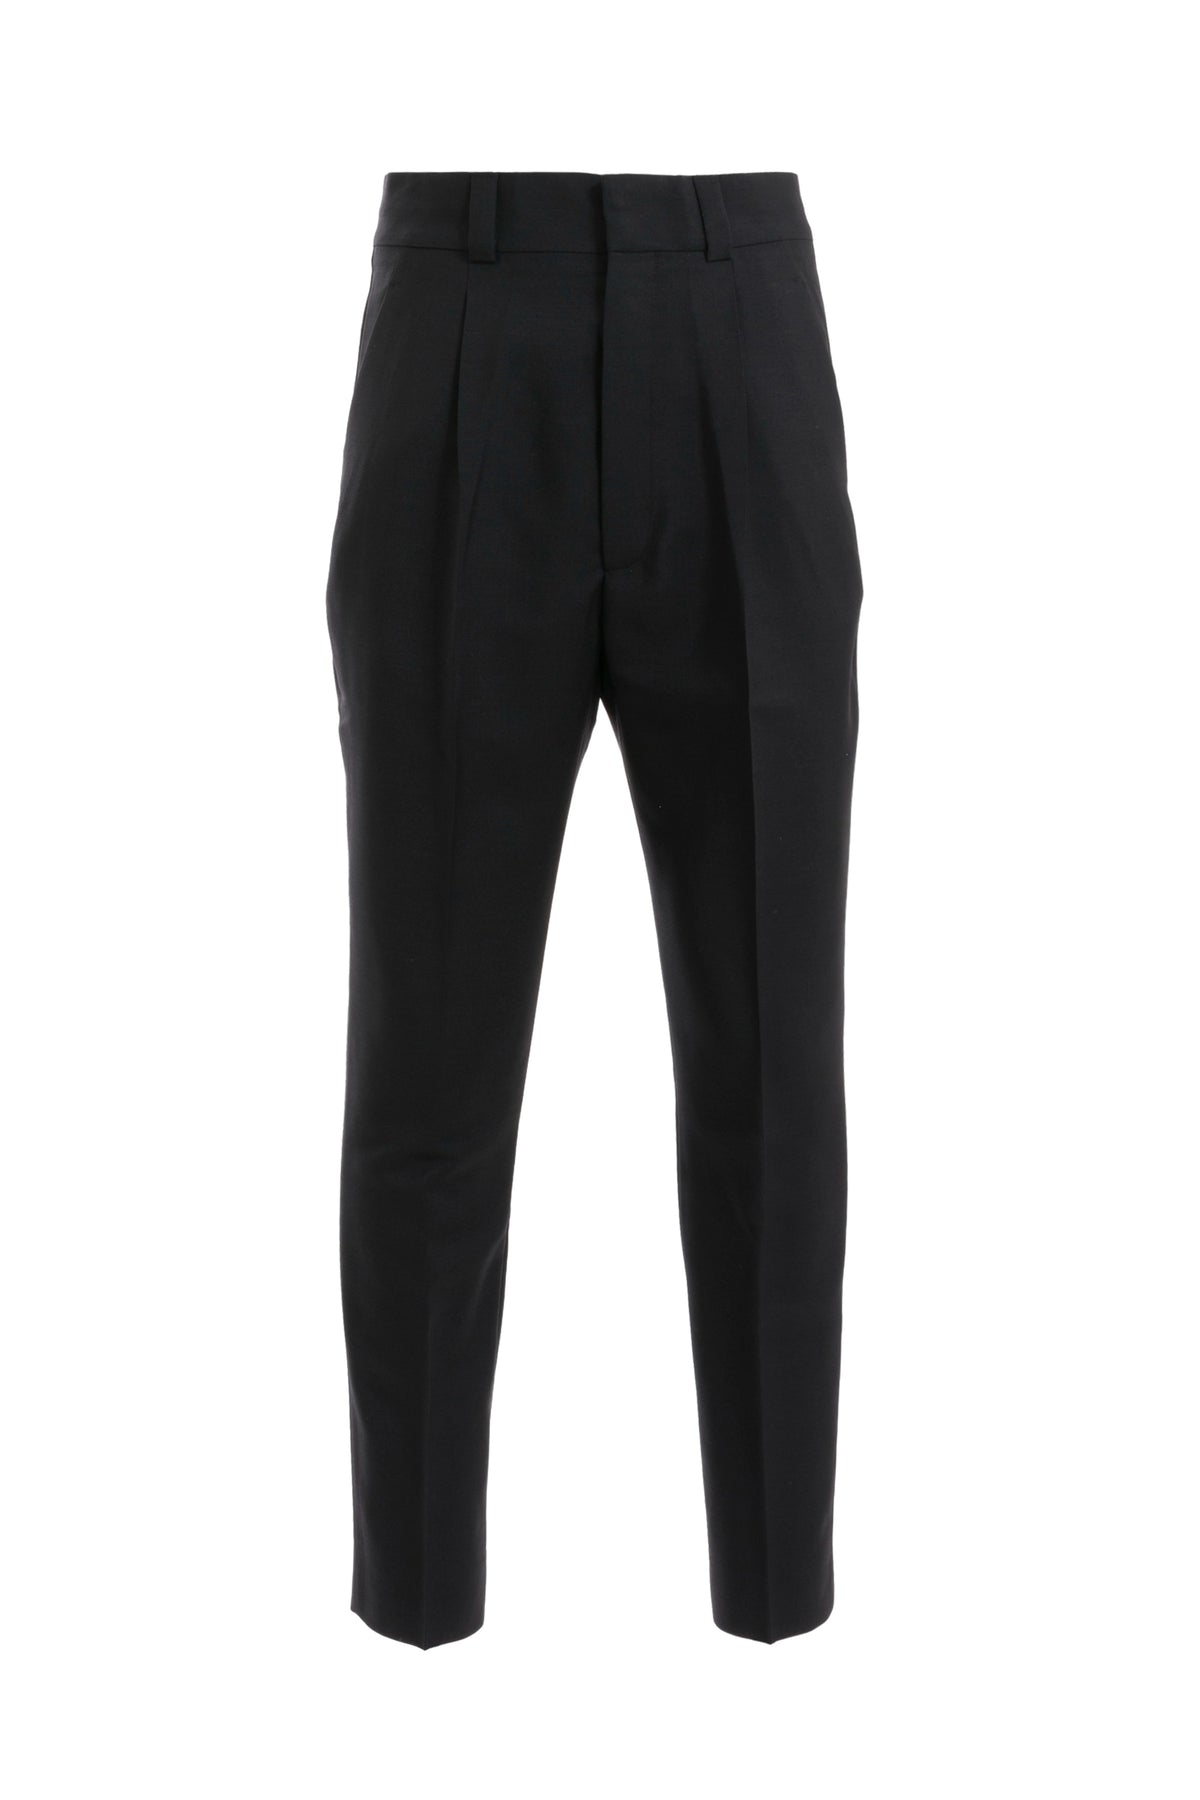 FEAR OF GOD THE ETERNAL COLLECTION ETERNAL WOOL MOHAIR SUIT PANT / BLK